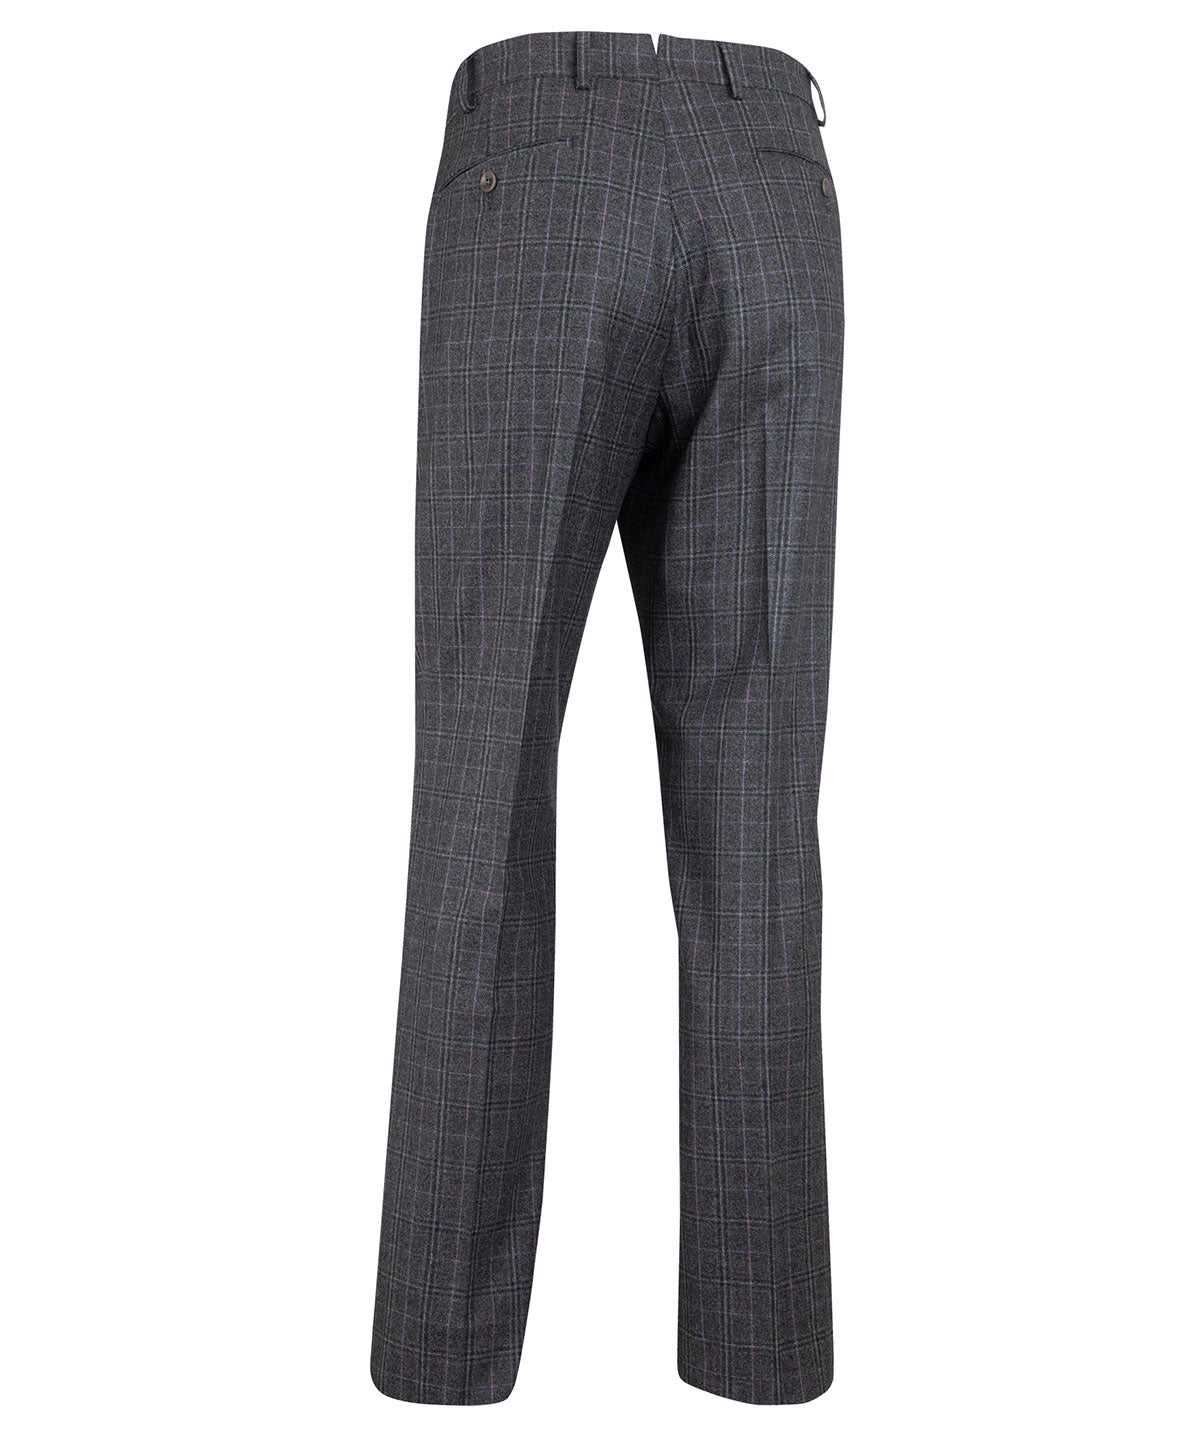 Heritage Flat Front Super 130s Check Pant